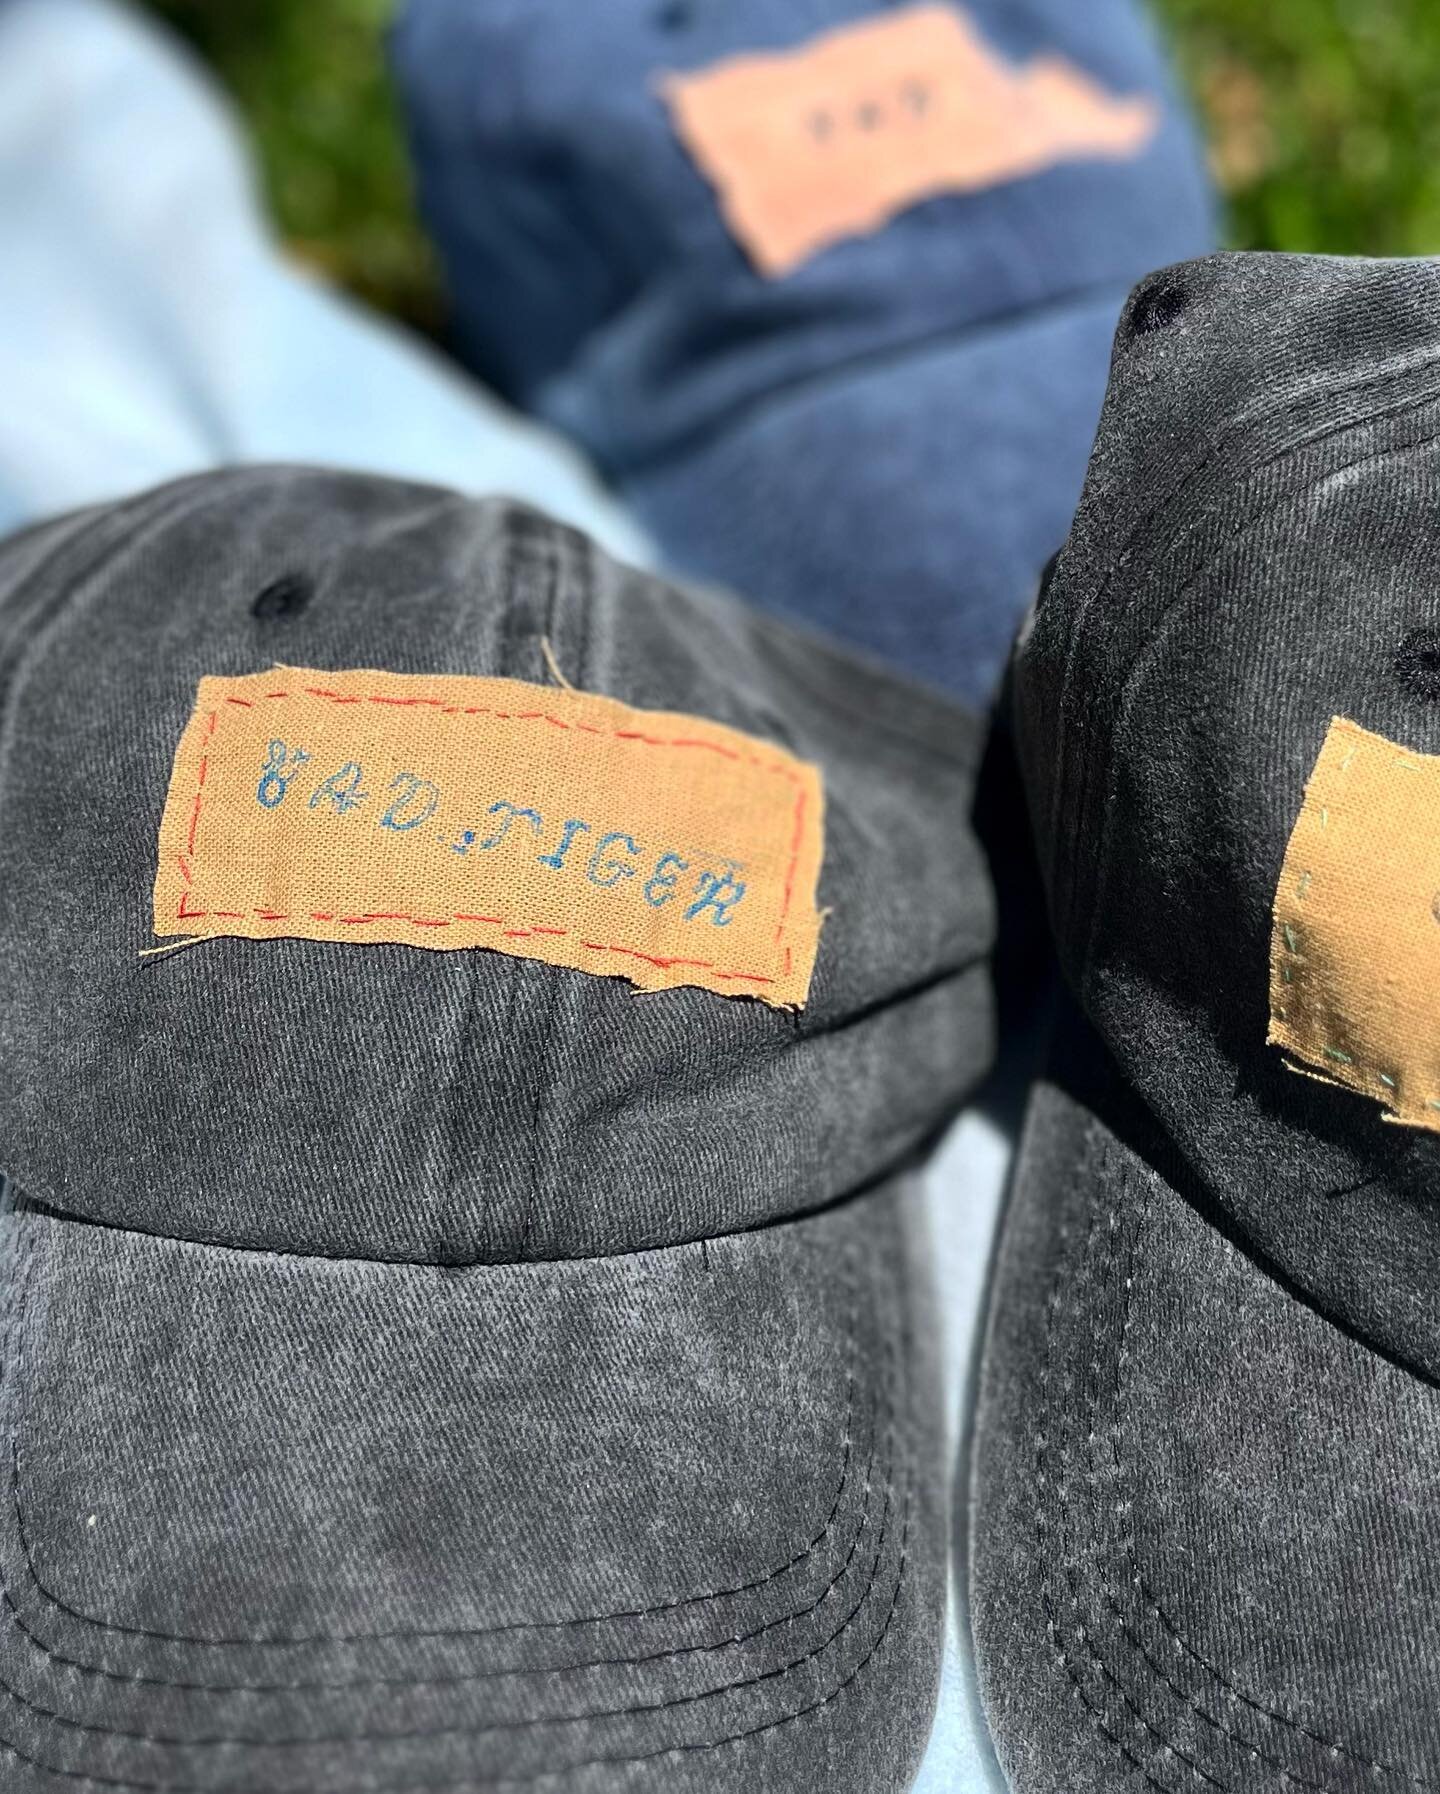 We have hats! Super limited edition, black n blue $15! come and get &lsquo;em at our @howdygalsatx show on 7/30 at @ivyroom 🧢🤠